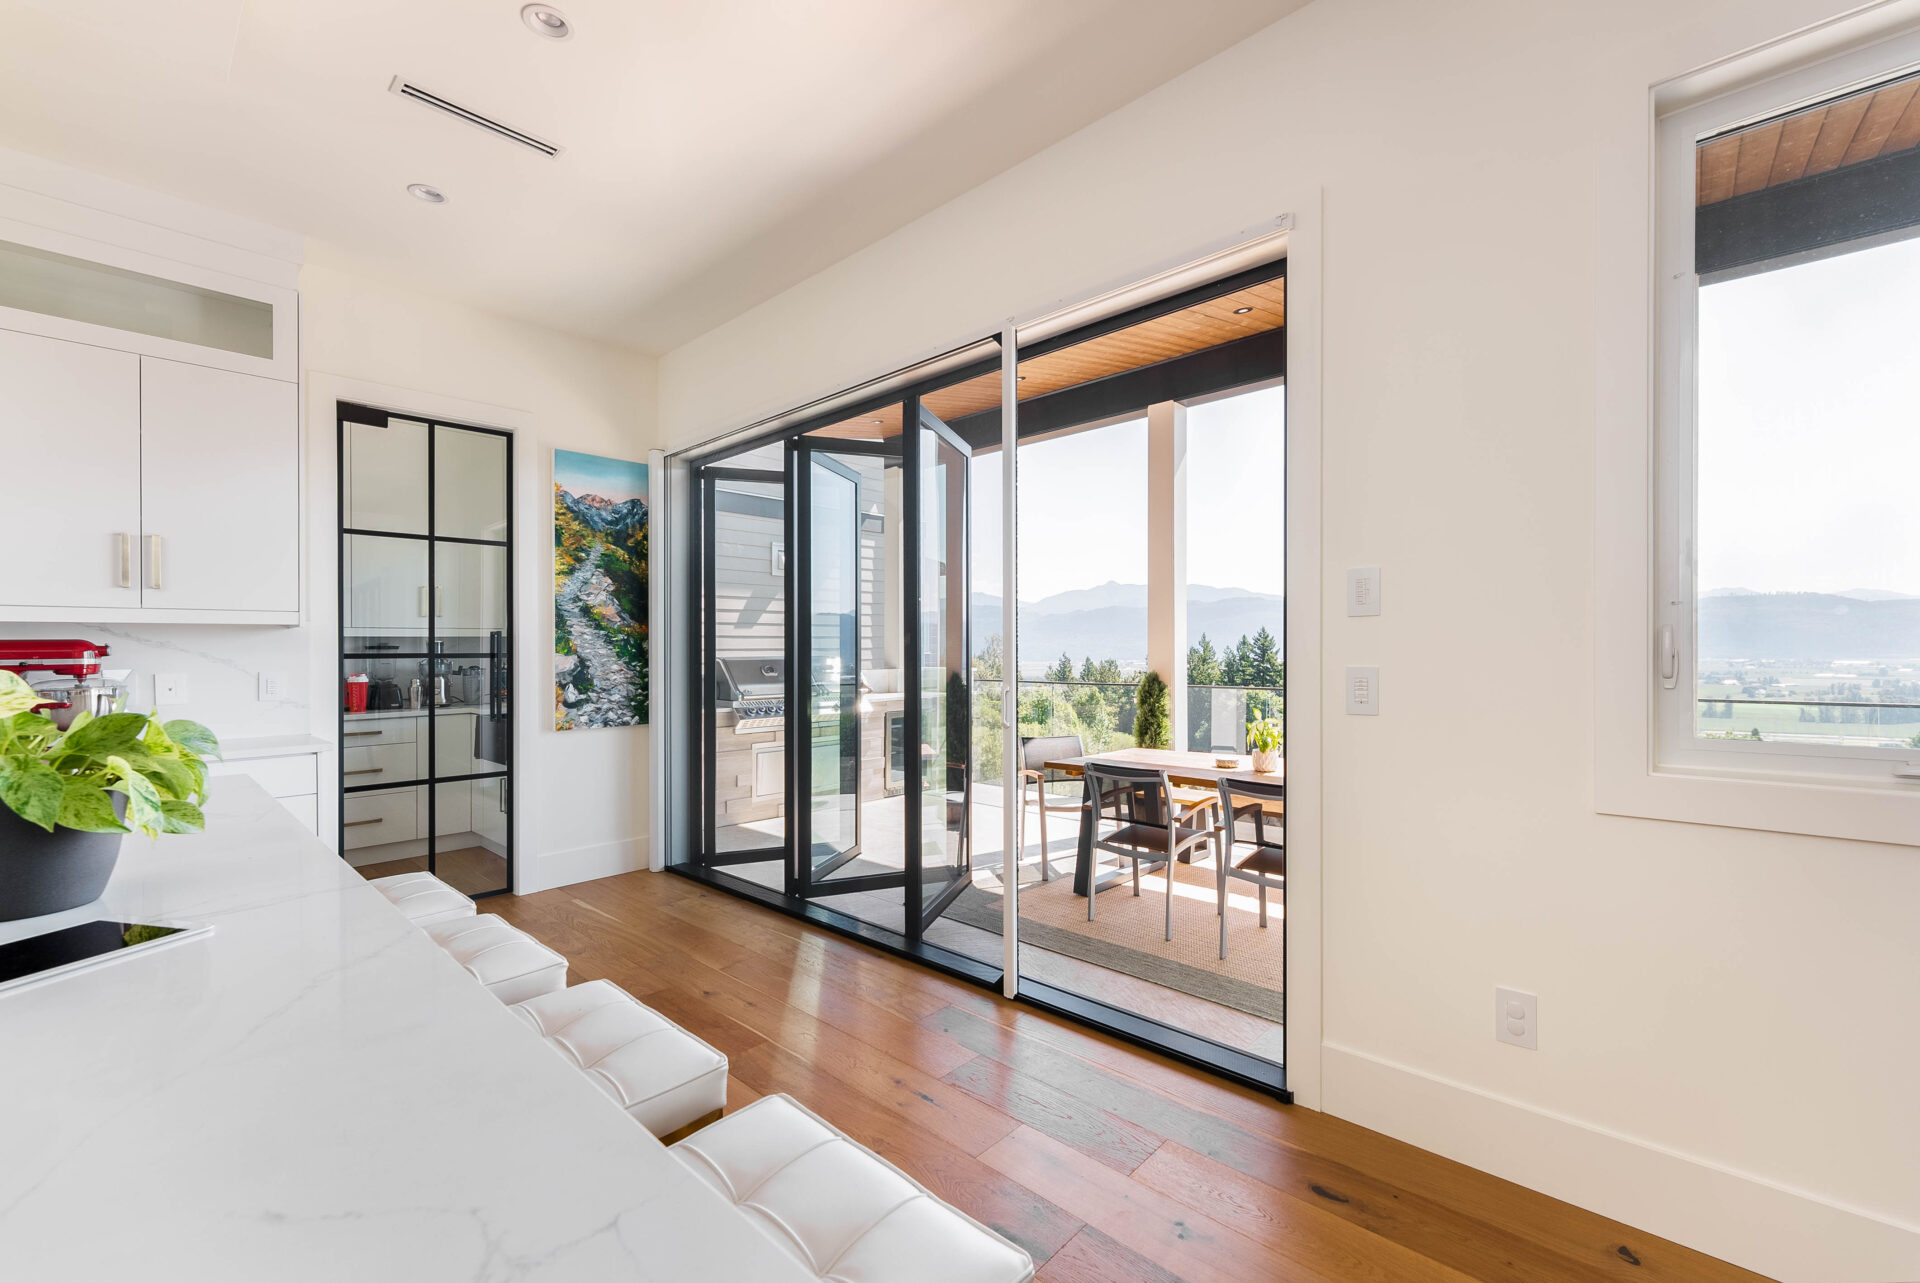 Phantom Retractable XL Screen mounts to a bi-fold door opening and lets fresh air in to the home.